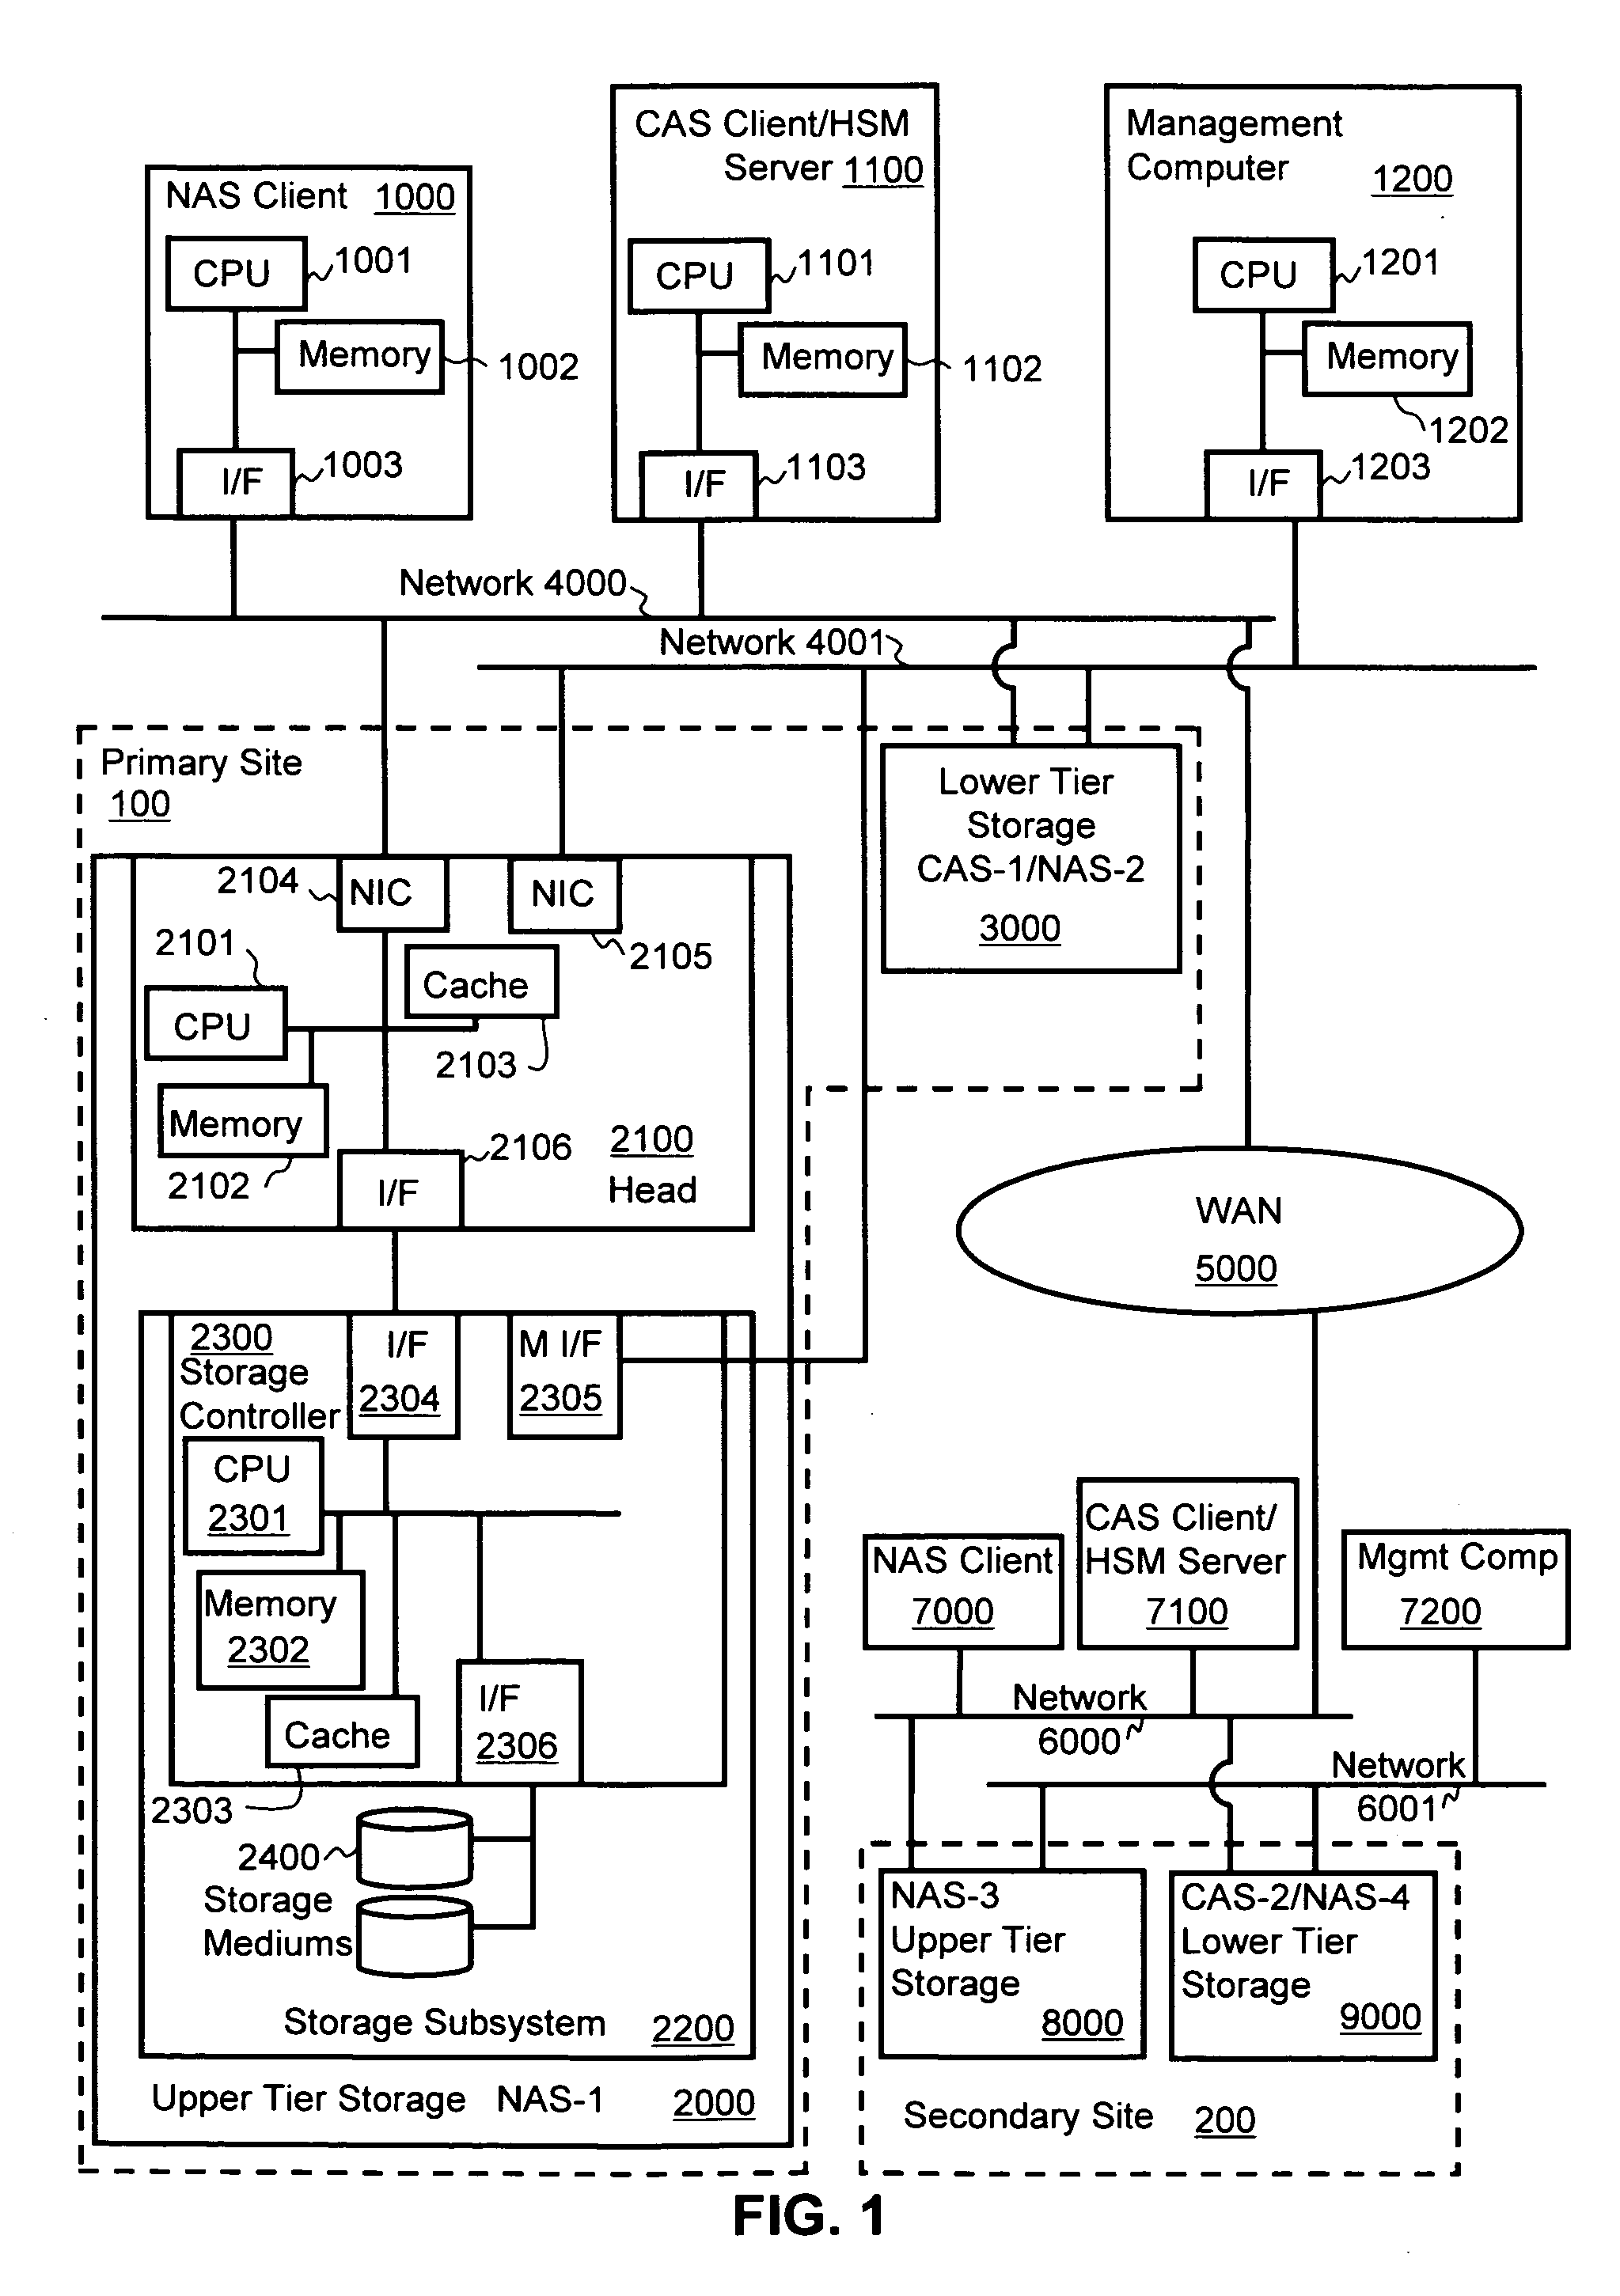 Integrated remote replication in hierarchical storage systems